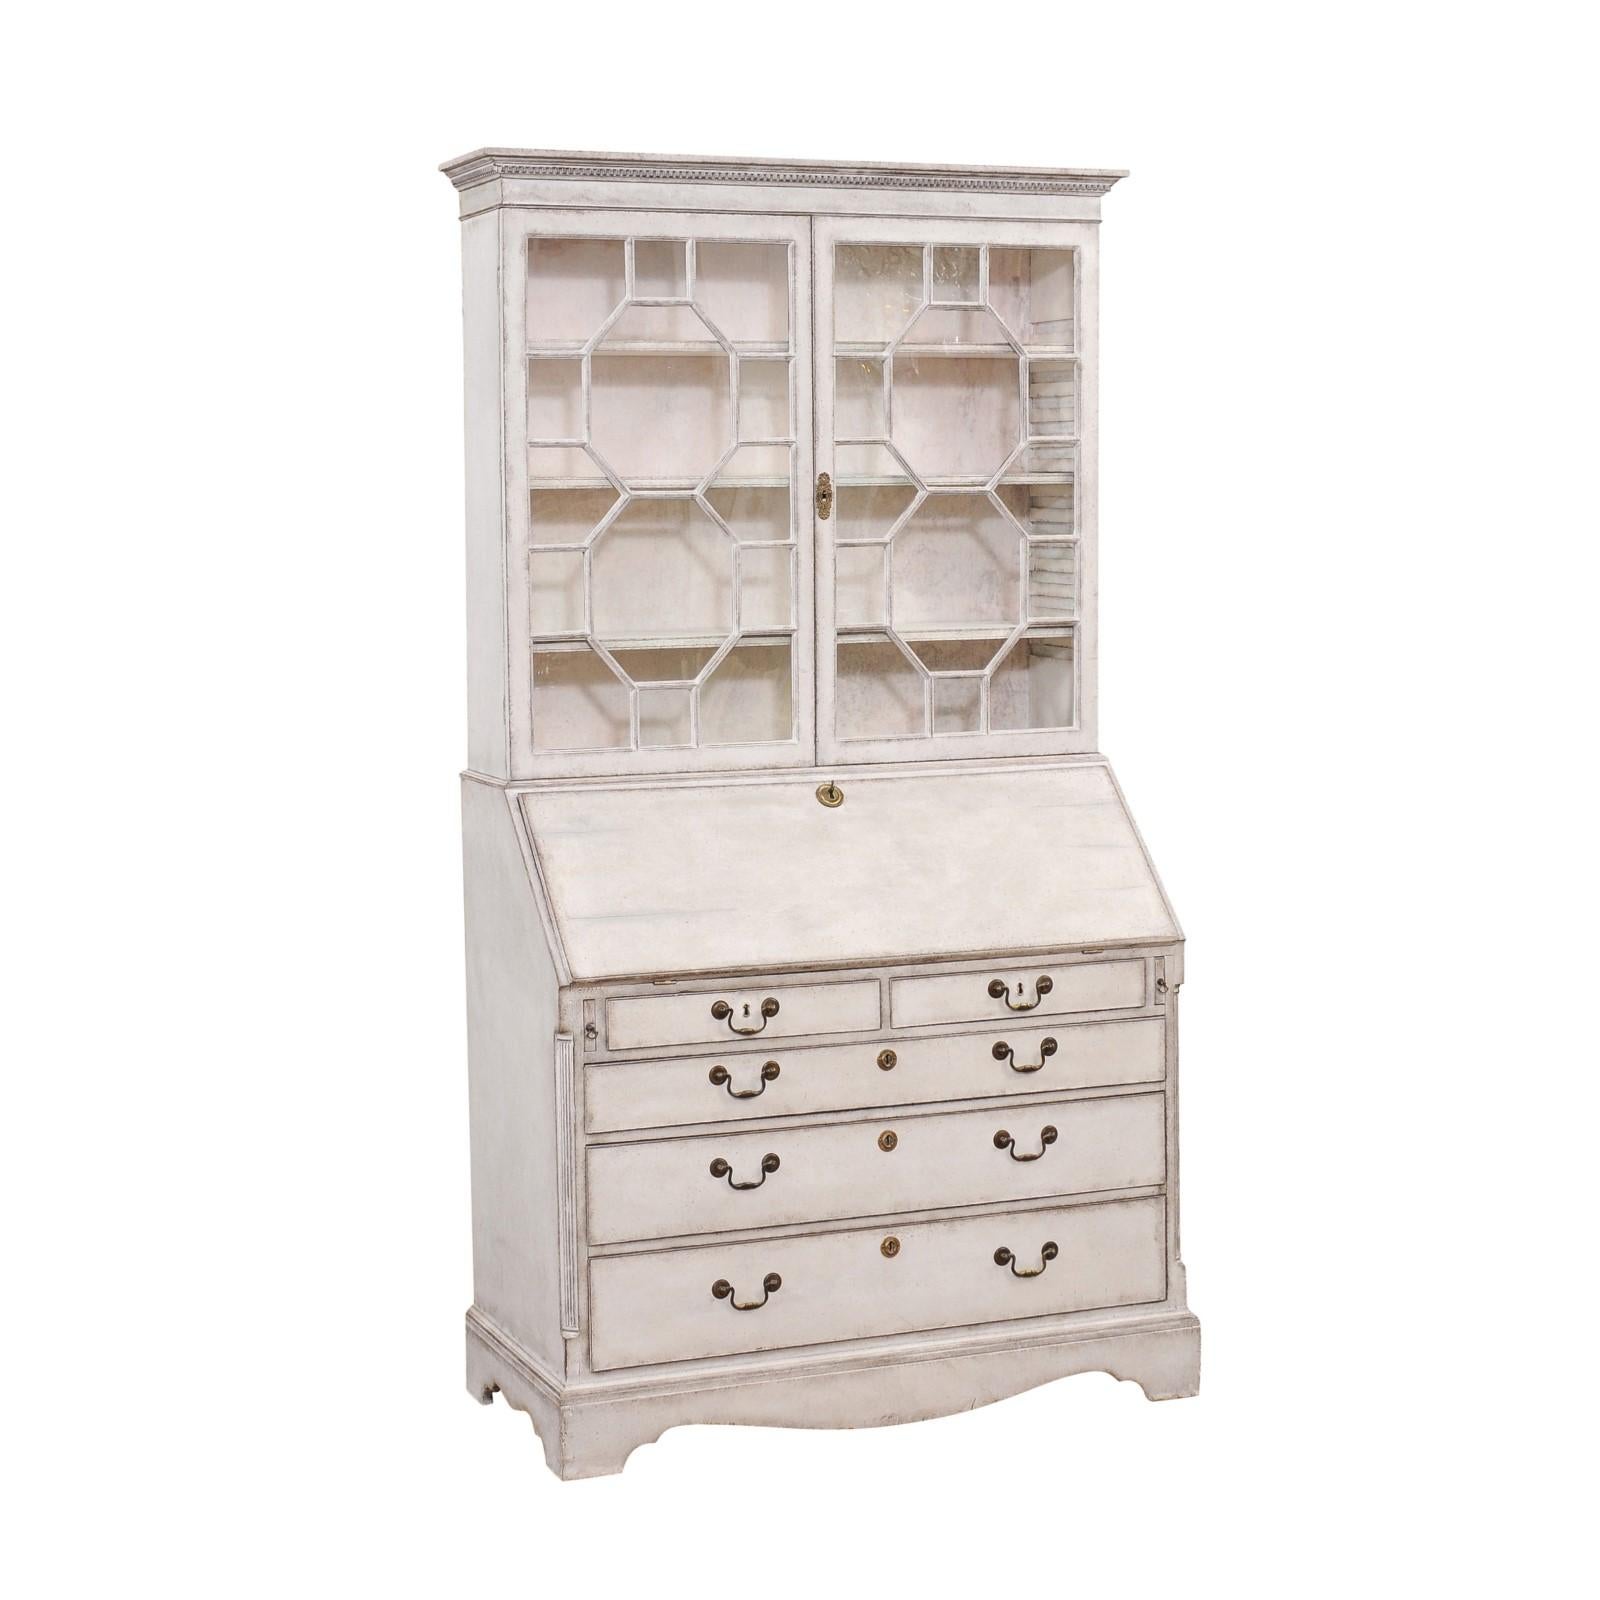 A European two-part tall secretary from the 18th century with gray / cream painted finish, old glass doors, slant front desk and five graduated drawers. Discover elegance and functionality intertwined in this stunning 18th-century European two-part